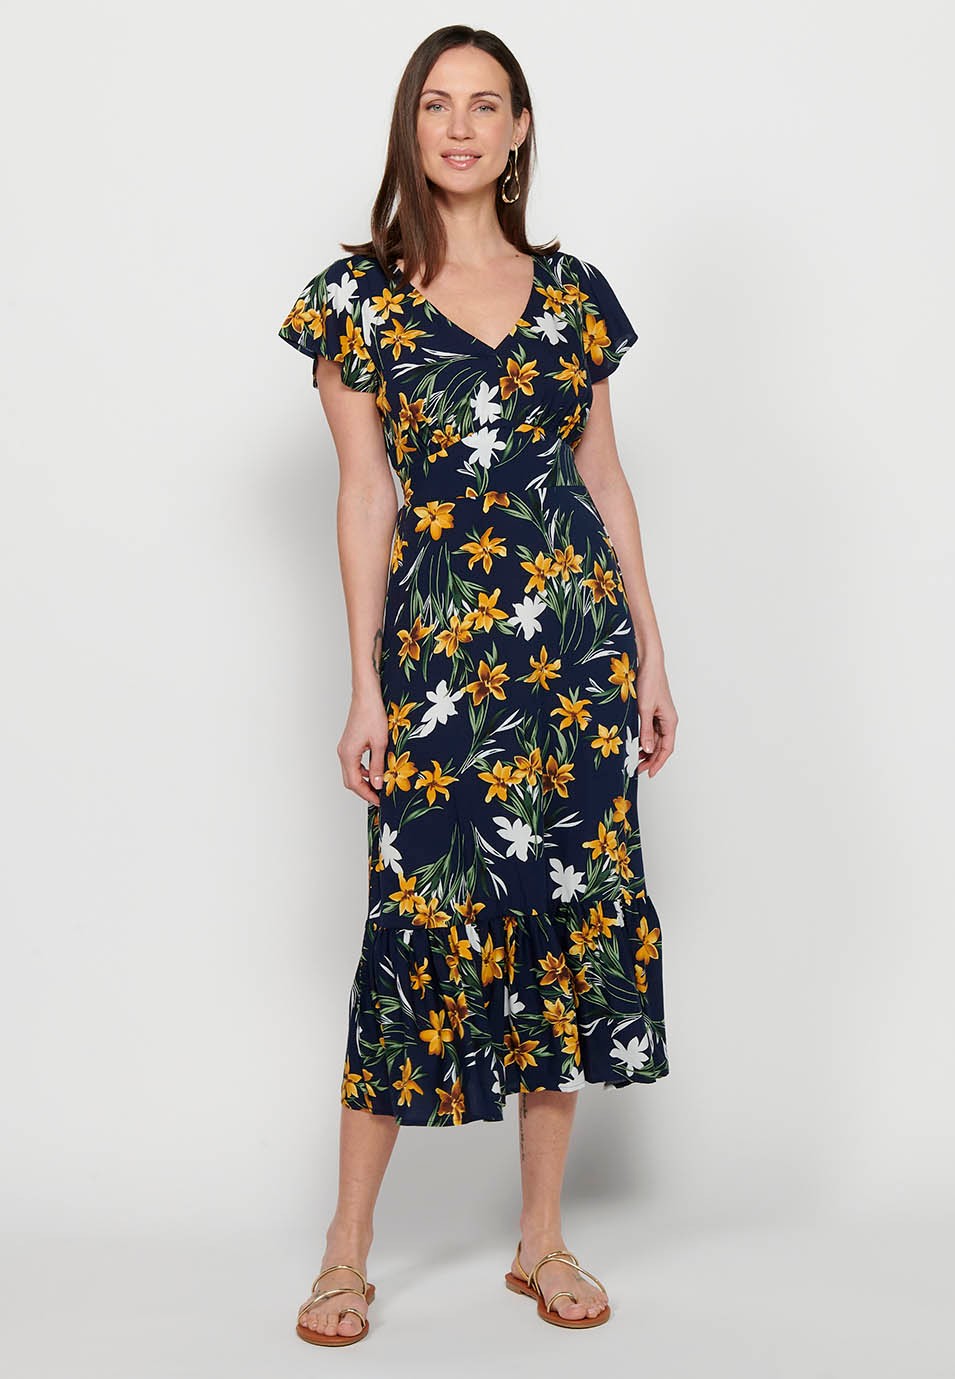 Long short-sleeved dress with V-neck and floral print in Navy for Women 7